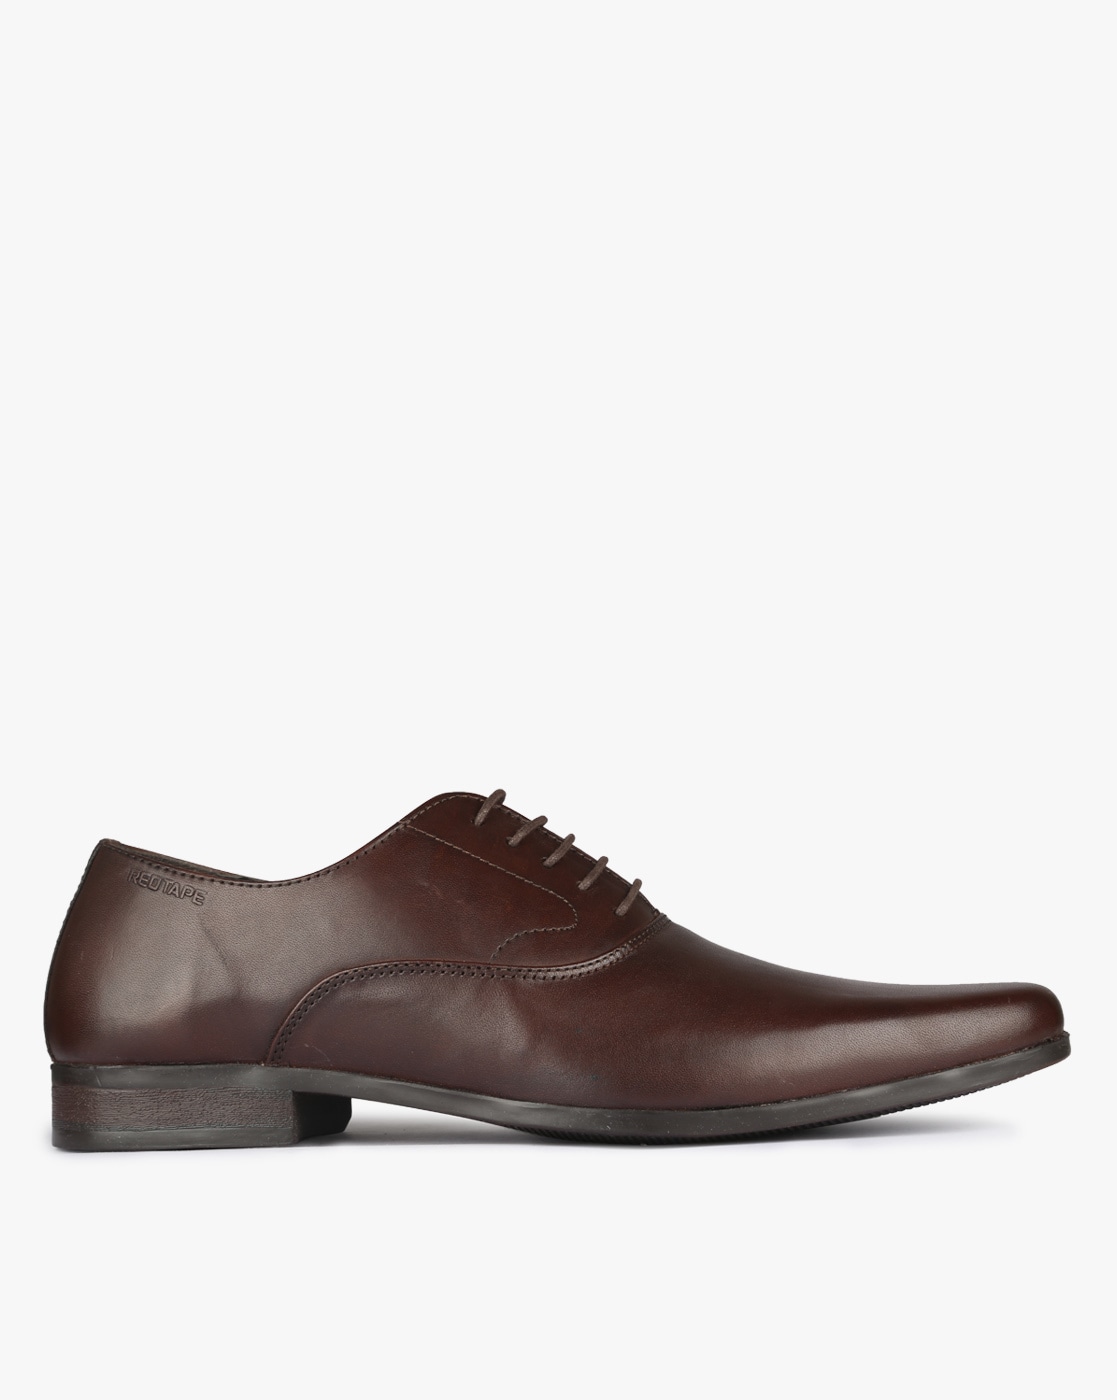 oxford shoes online